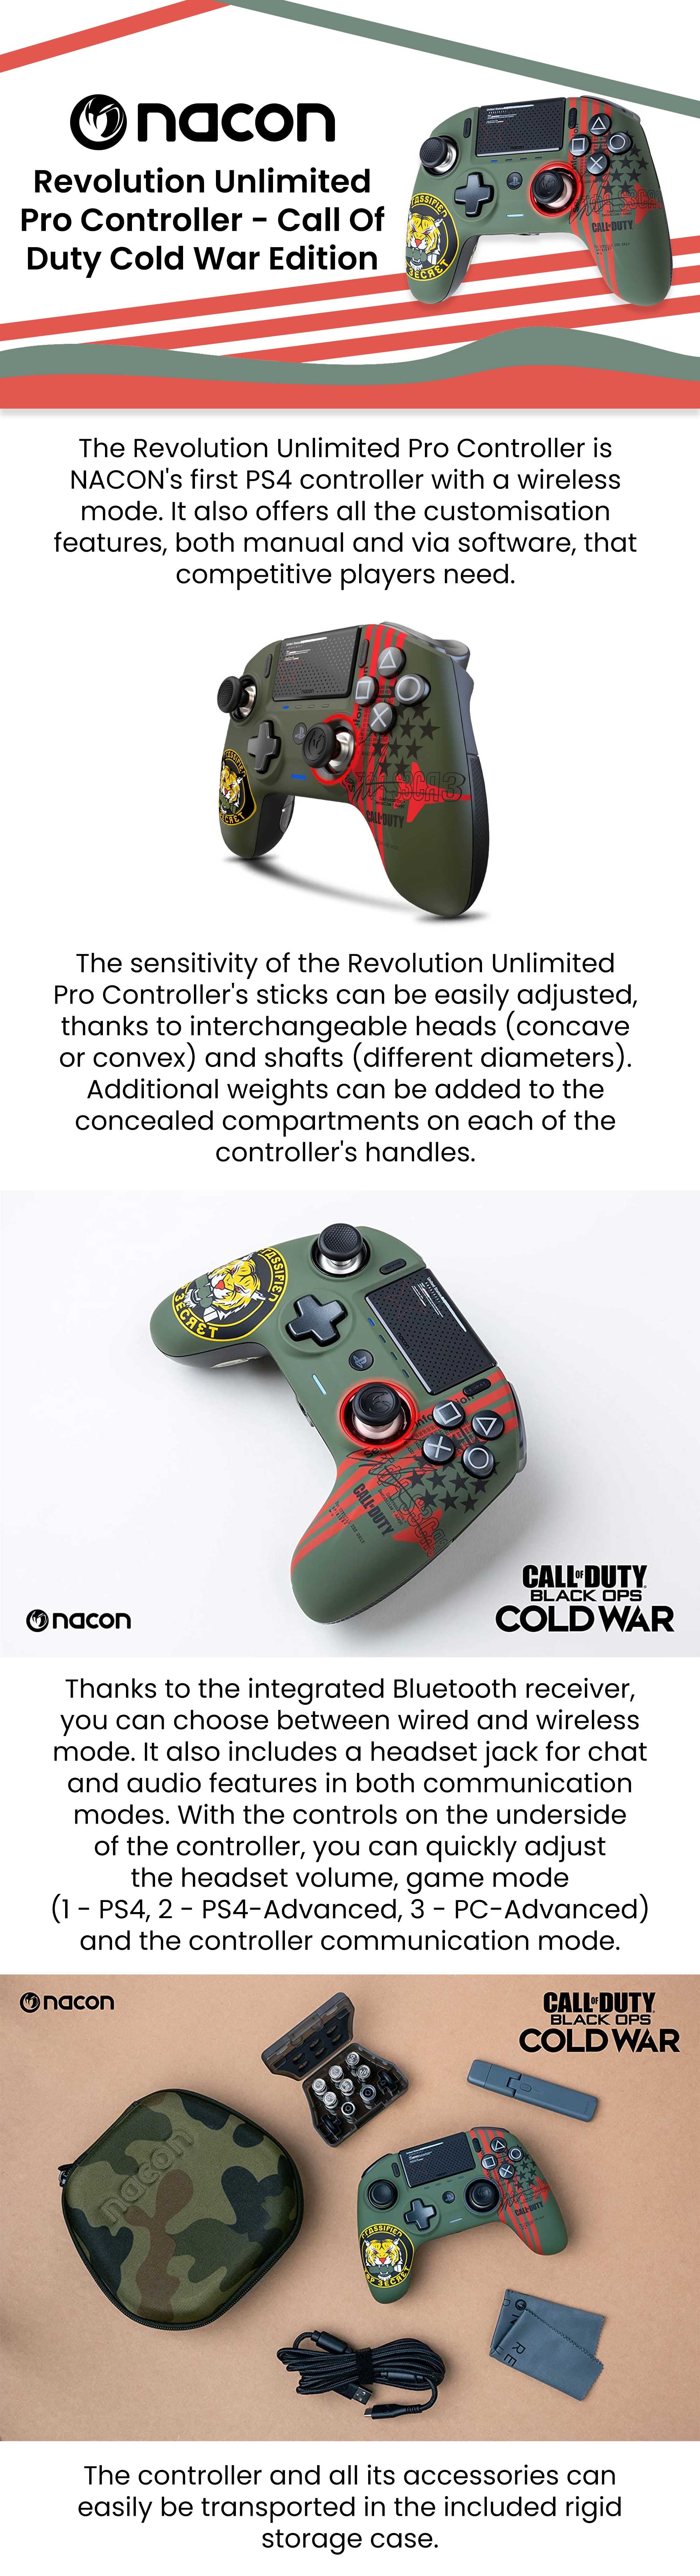 NACON REVOLUTION UNLIMITED PRO CONTROLLER JOYSTICK PS4 WIRED / WIRELESS  CALL OF DUTY COLD WAR